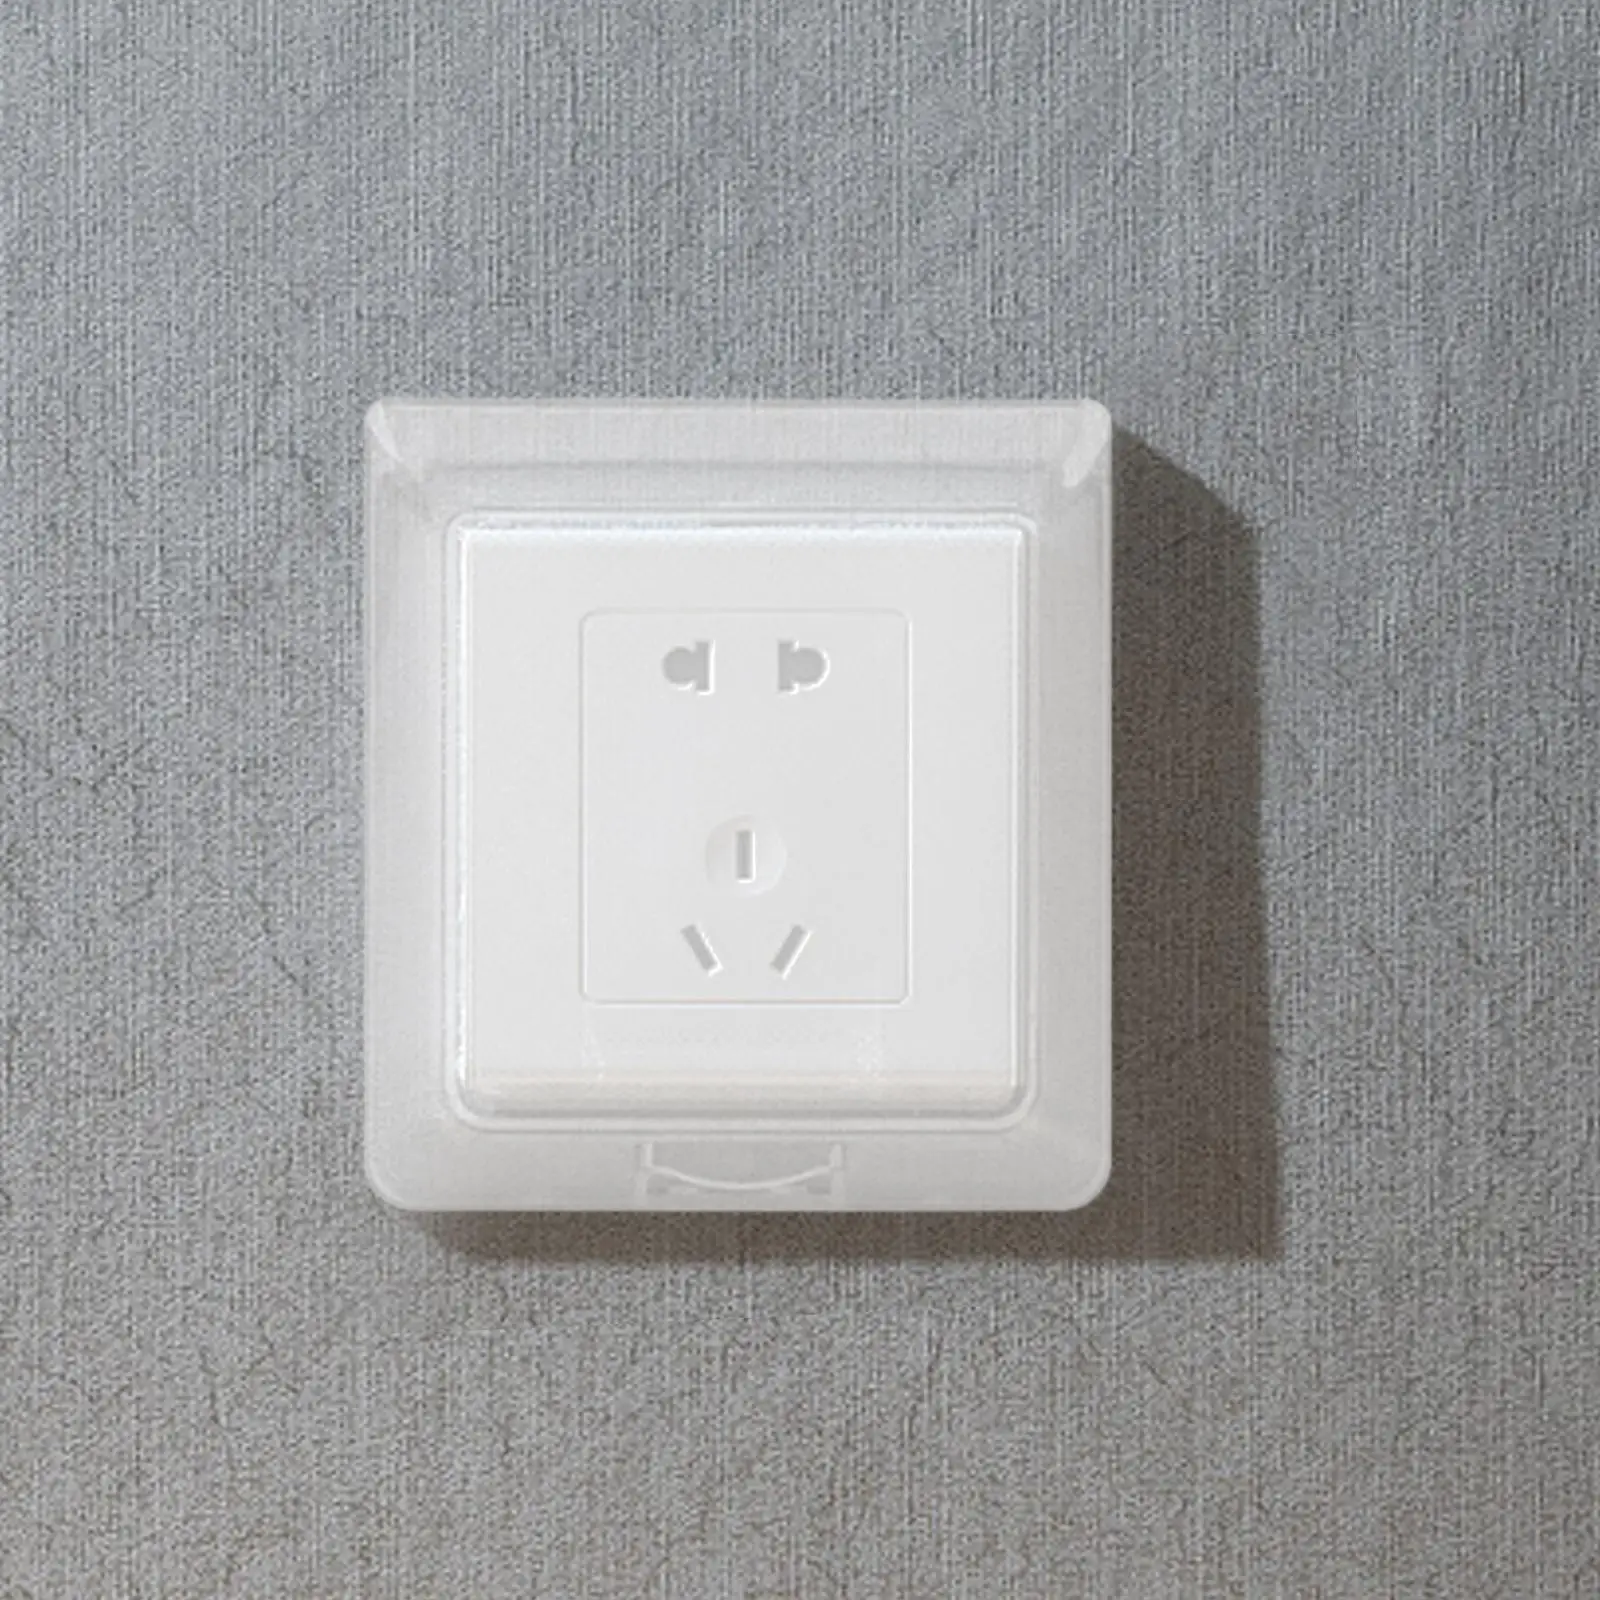 Switch Cover Electrical Outlet Cover Waterproof Lamp Switch Cover for Indoor